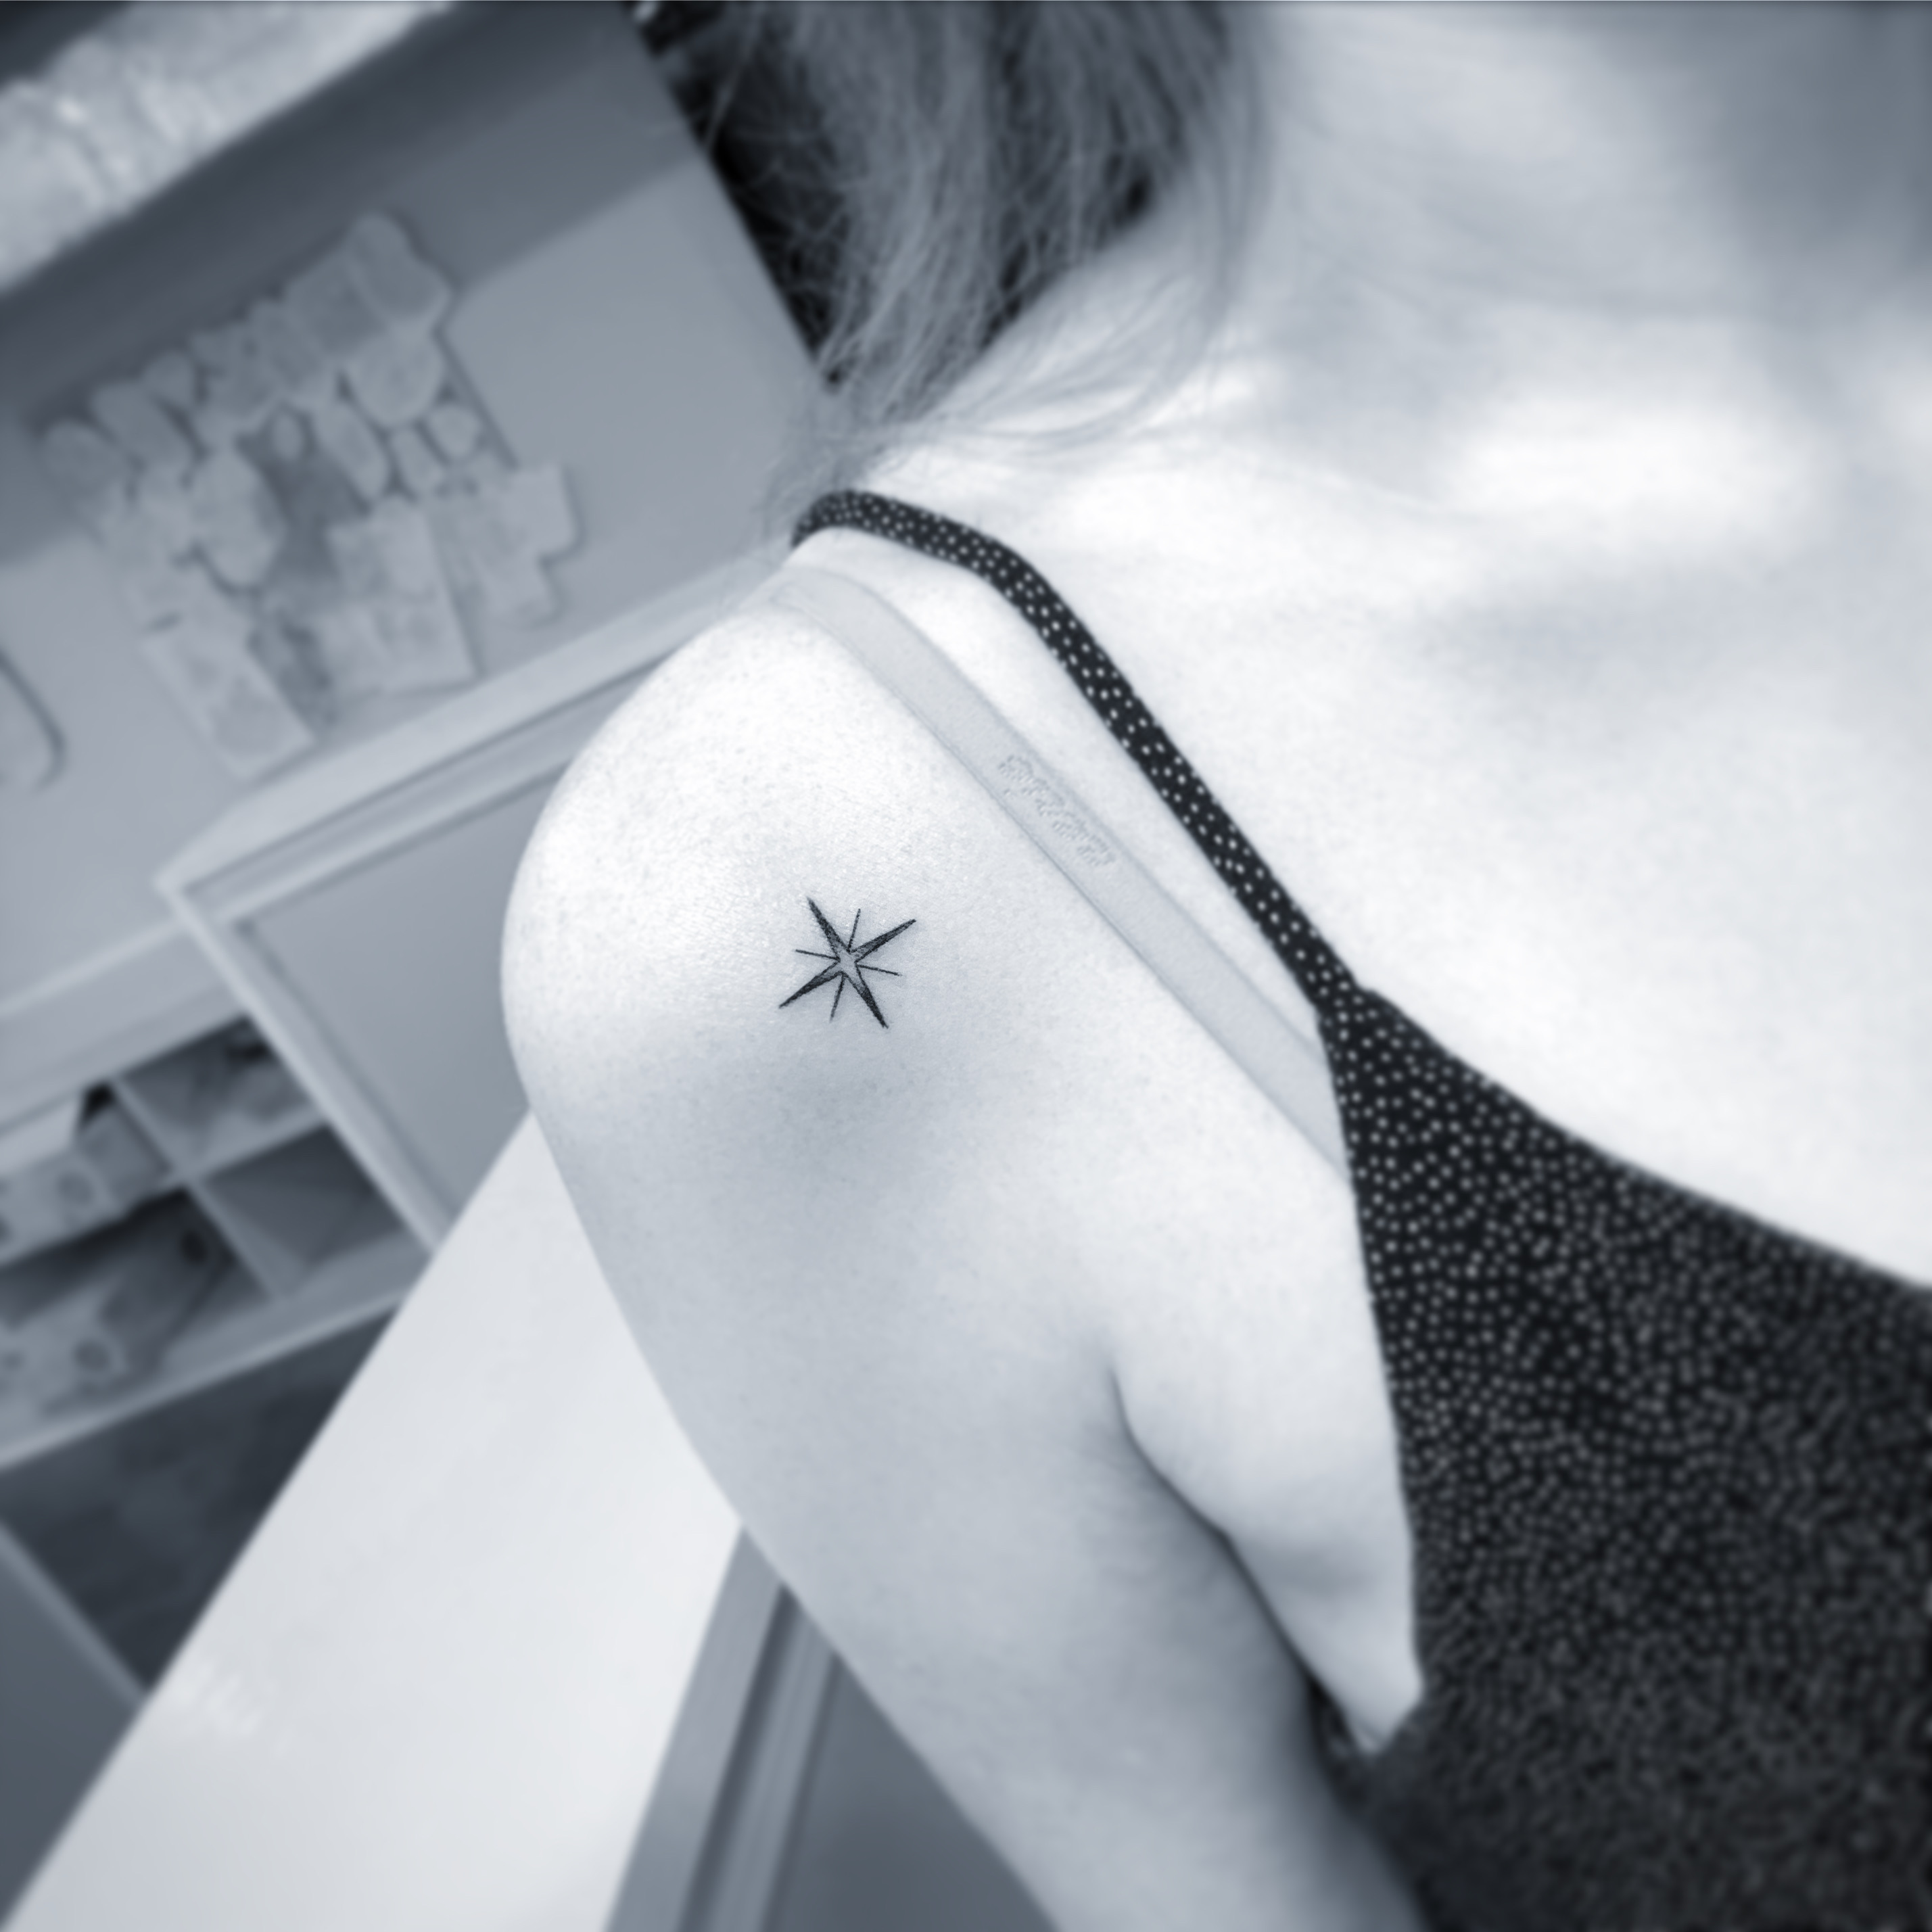 Make a style statement with our temporary small star tattoo. New and trendy, show your fun side with this chic and easy-to-apply tattoo. Available in multiple colors to suit your personal flair.